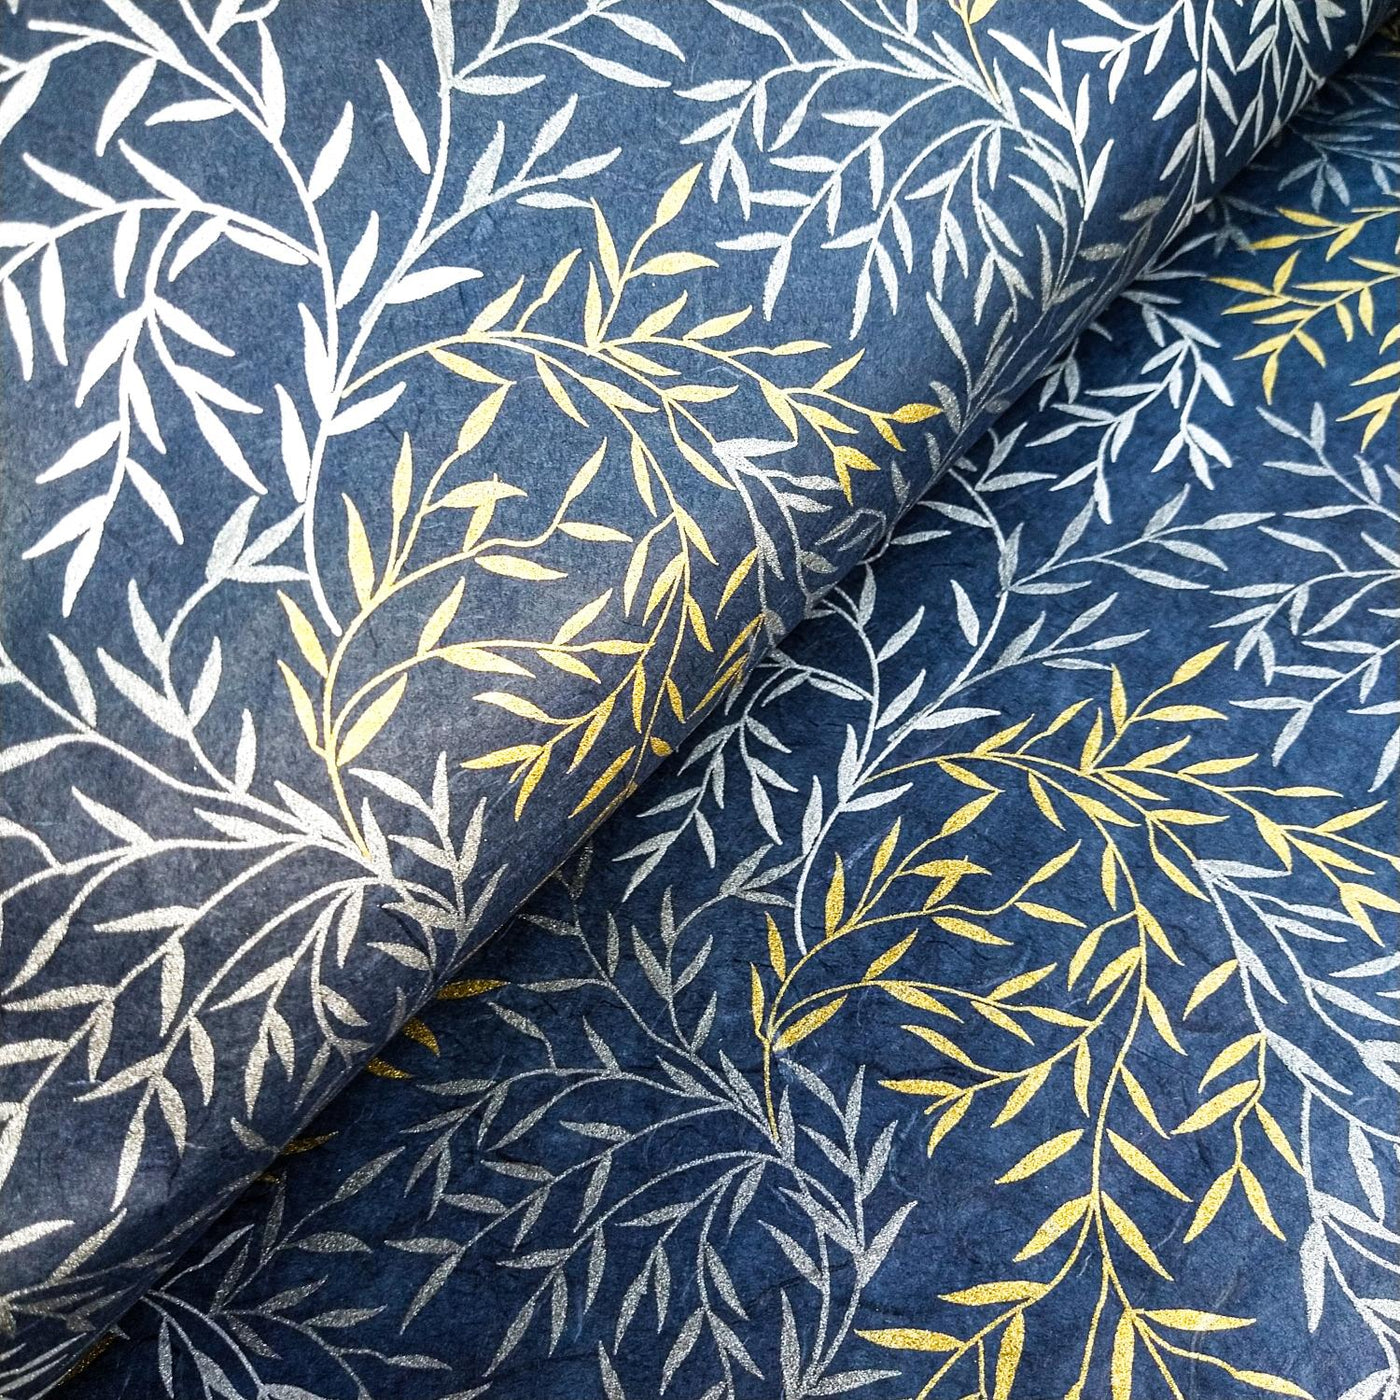 Willow Screen-printed Kozo Mulberry Paper (Blue)